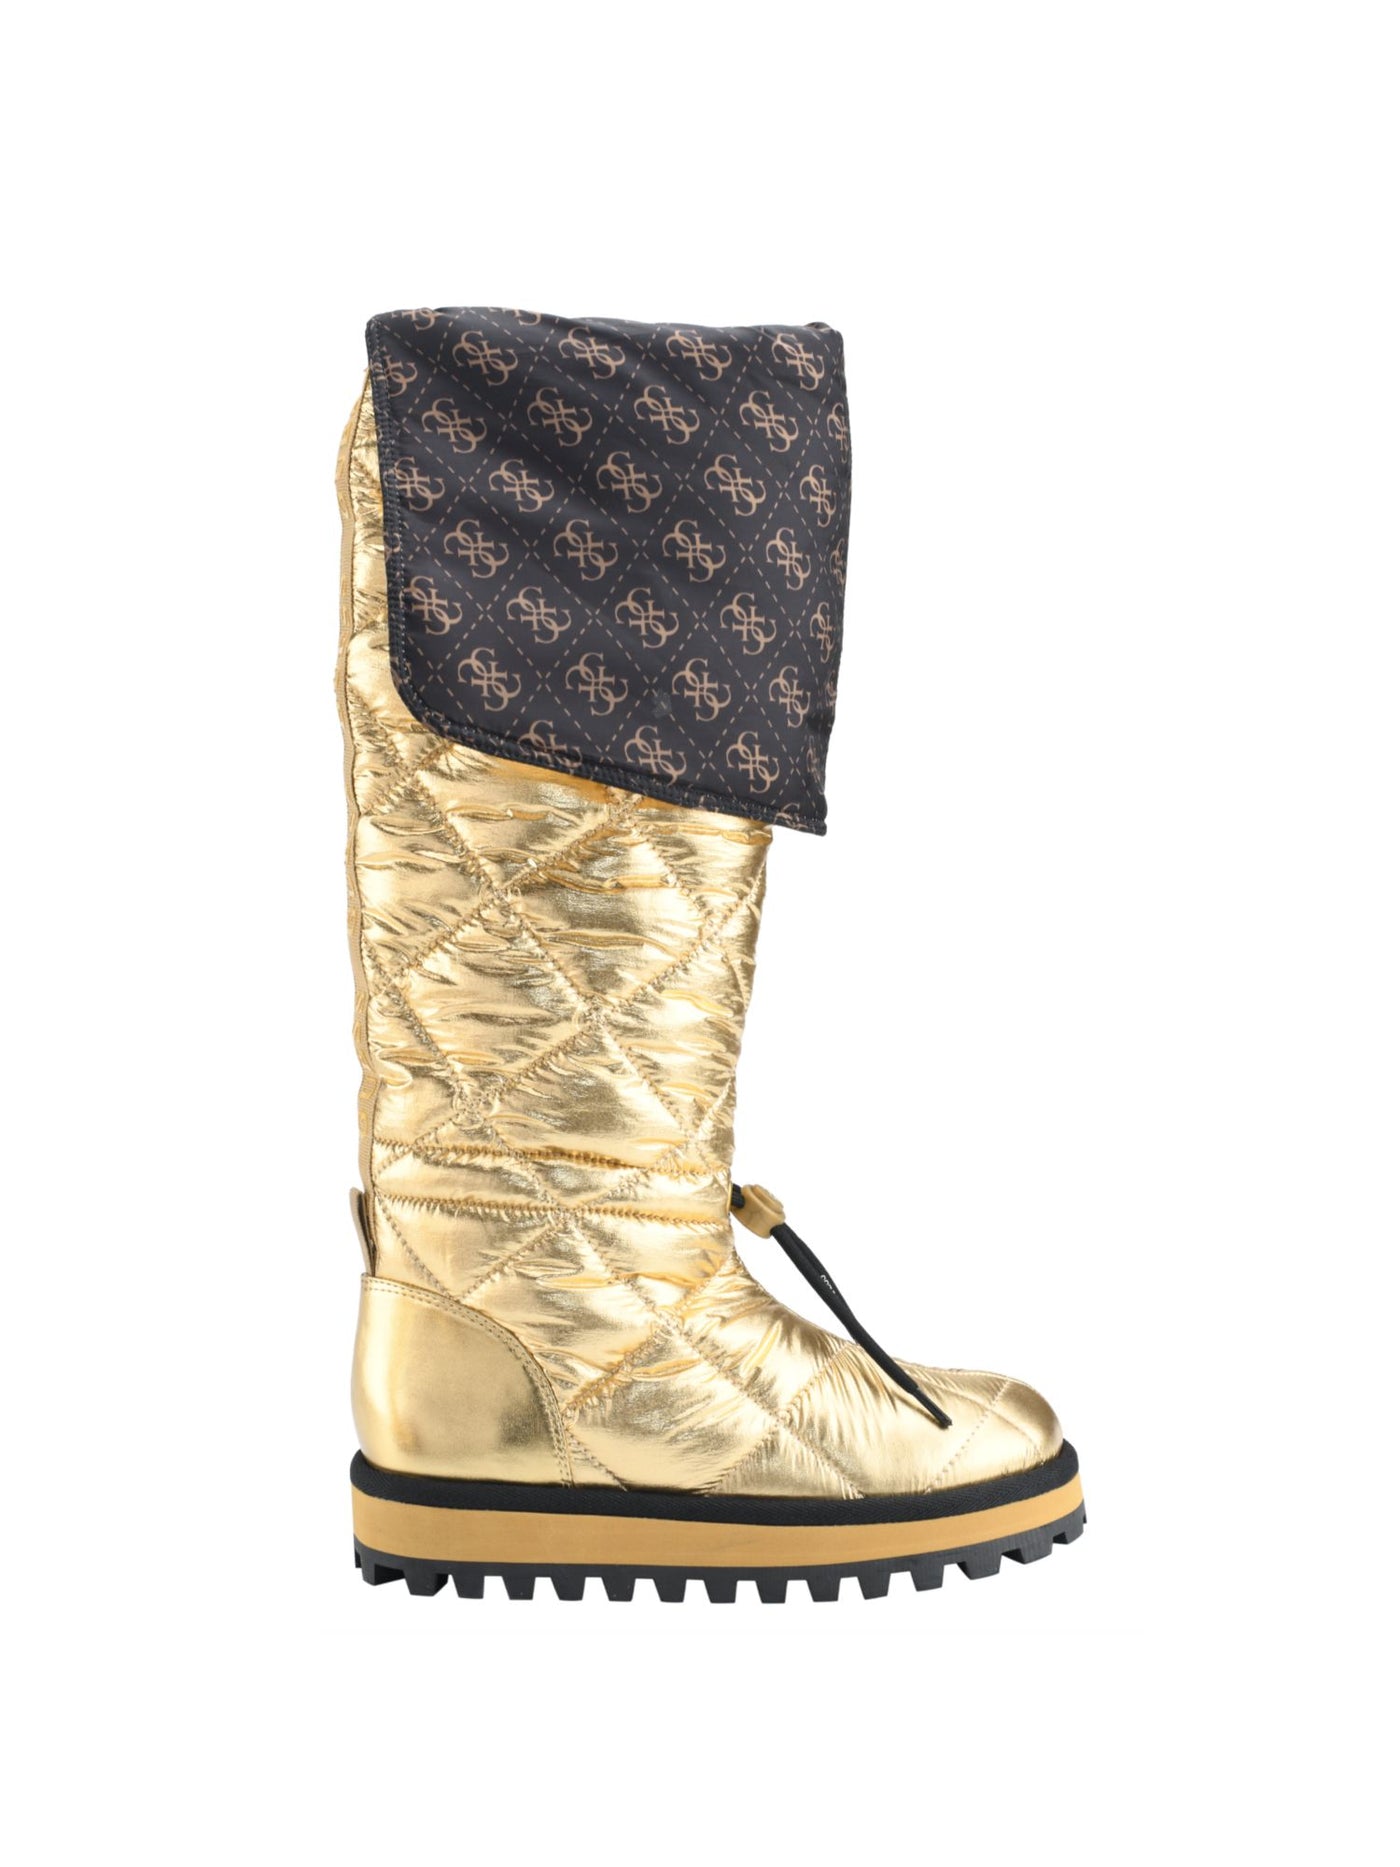 GUESS Womens Gold Lug Sole Quilted Ladiva Round Toe Platform Winter 6 M